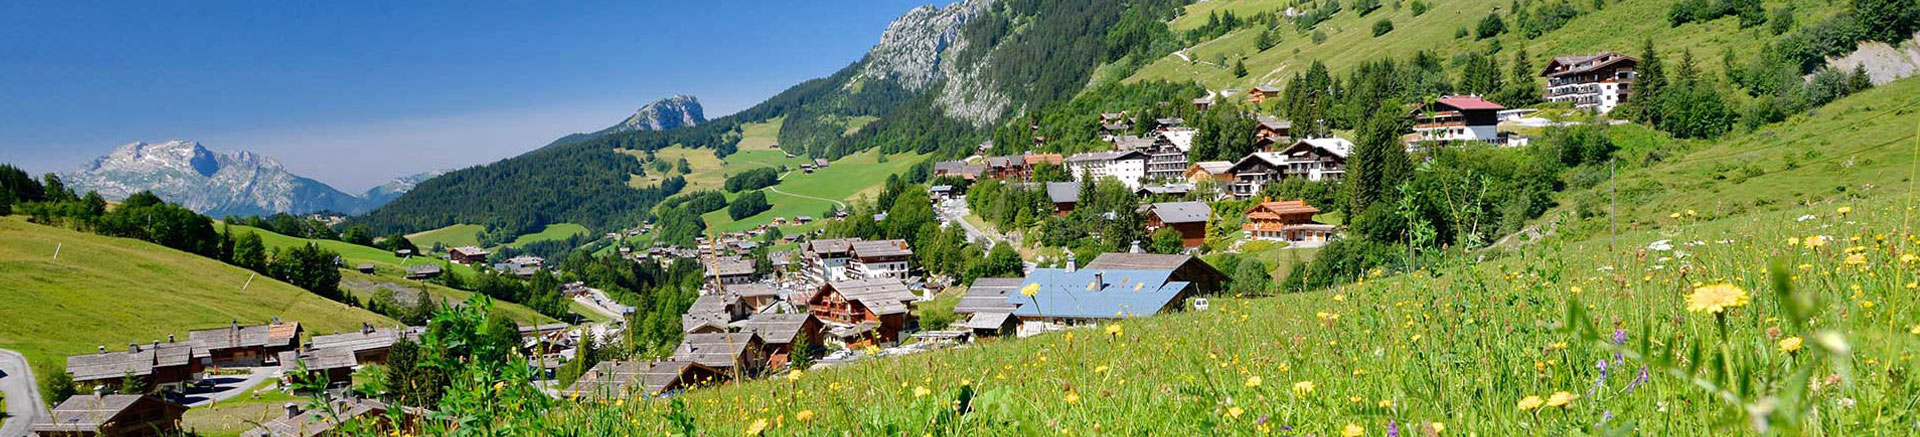 Summer activities in Le Grand Bornand